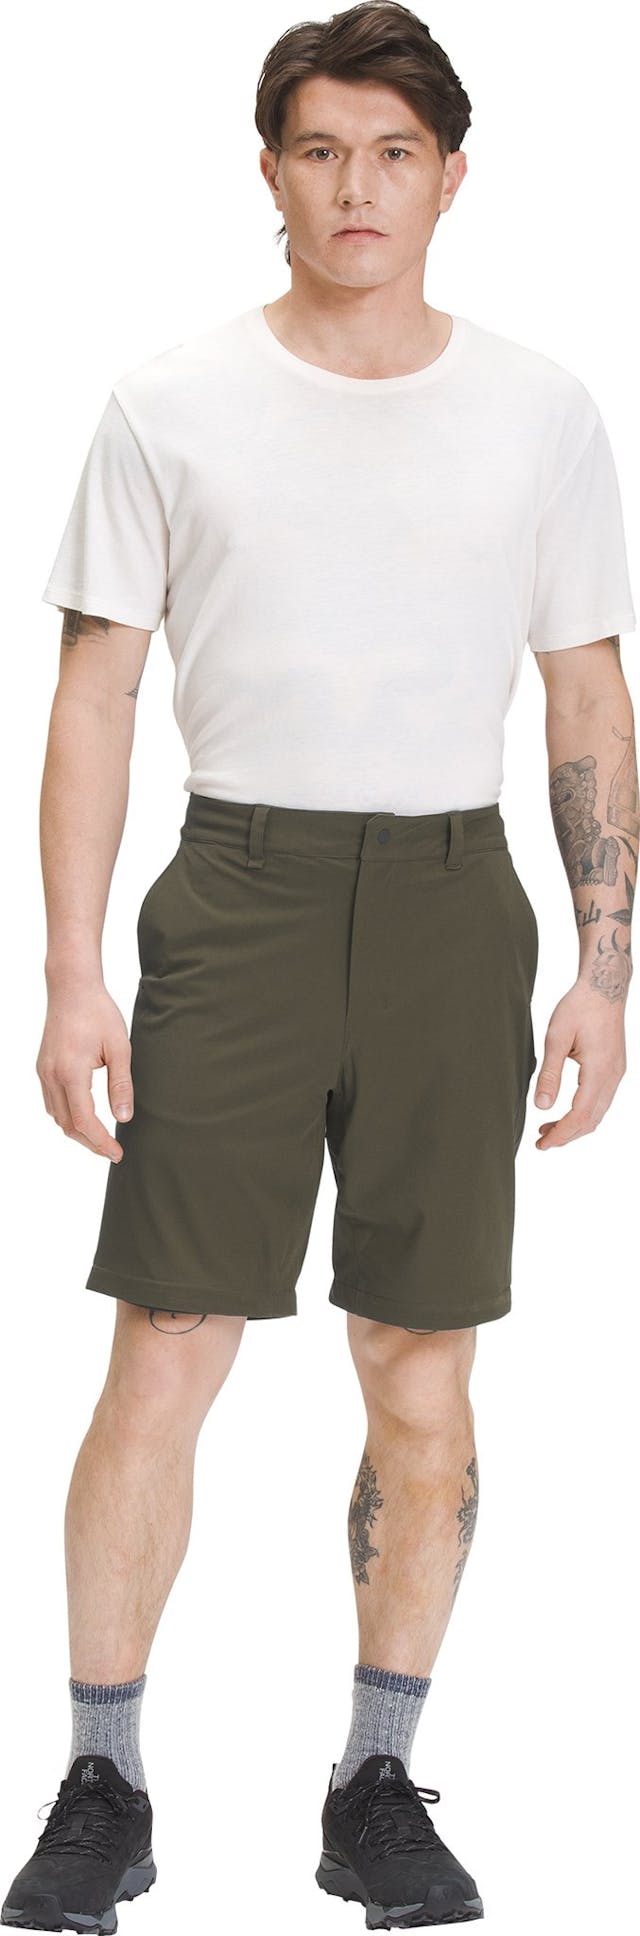 Product image for Paramount Convertible Pant - Men's